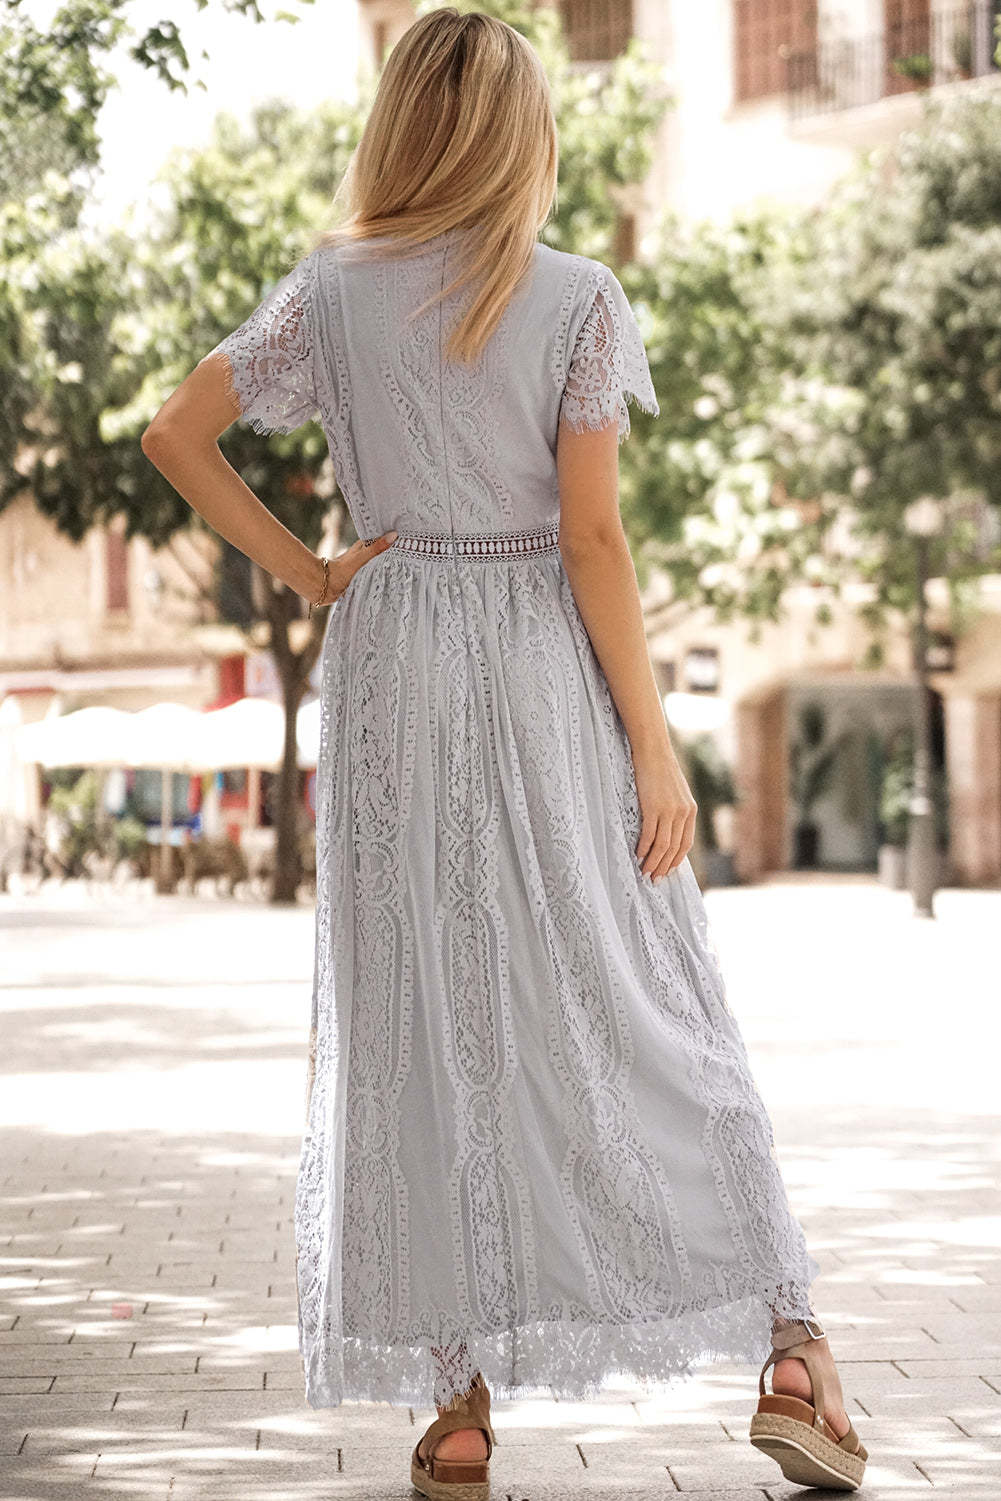 Gray Fill Your Heart Lace Maxi Dress $ 57.99 - Evaless